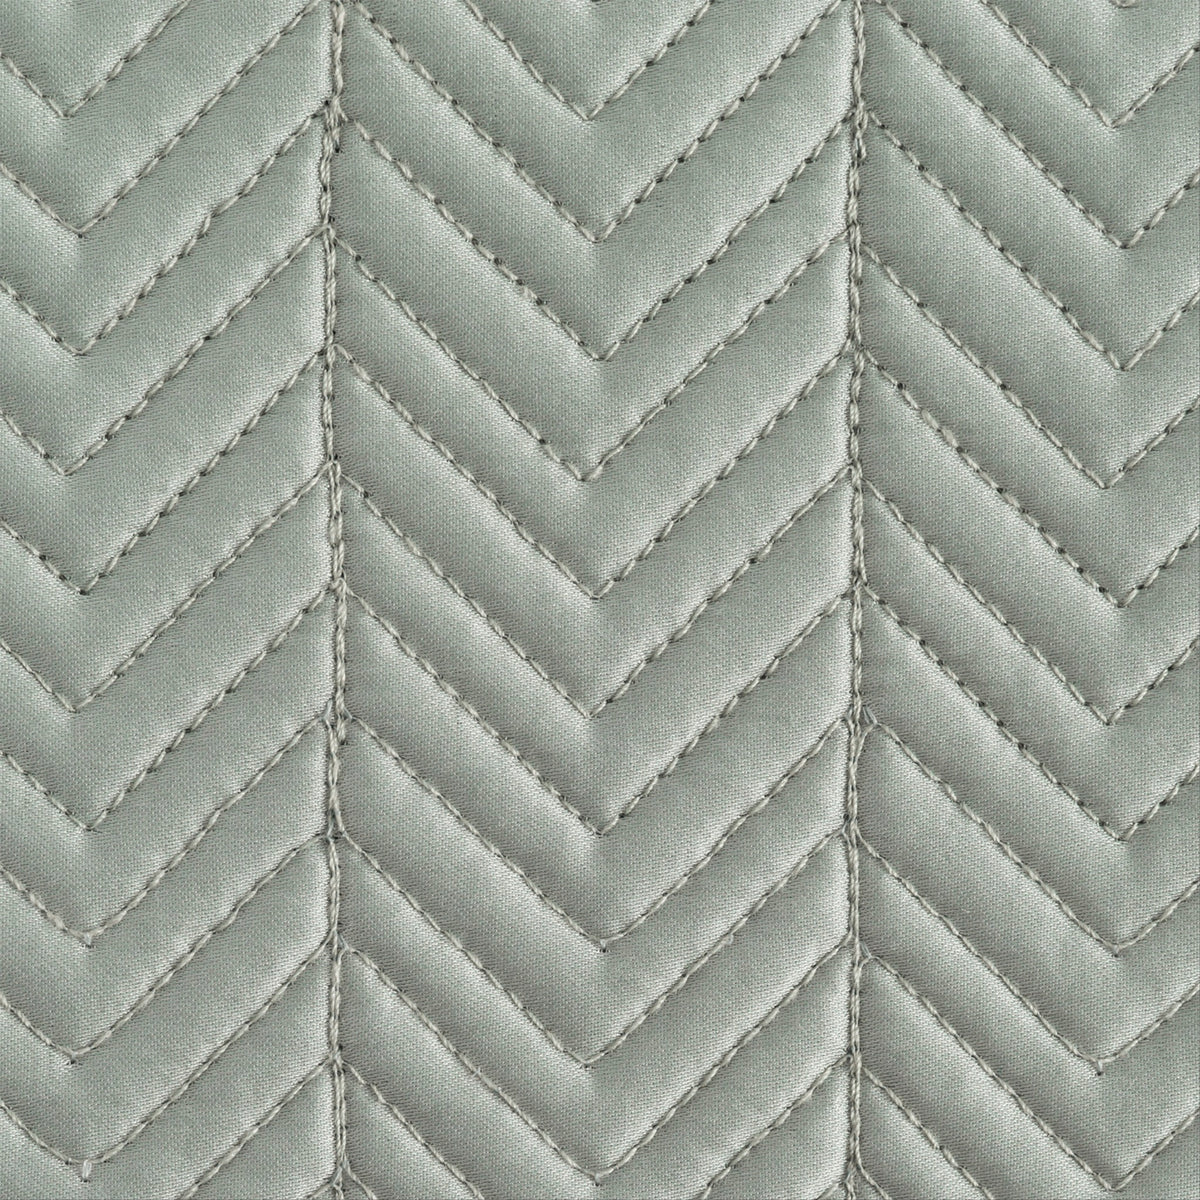 Swatch Sample of Matouk Netto Bedding in Celadon Color